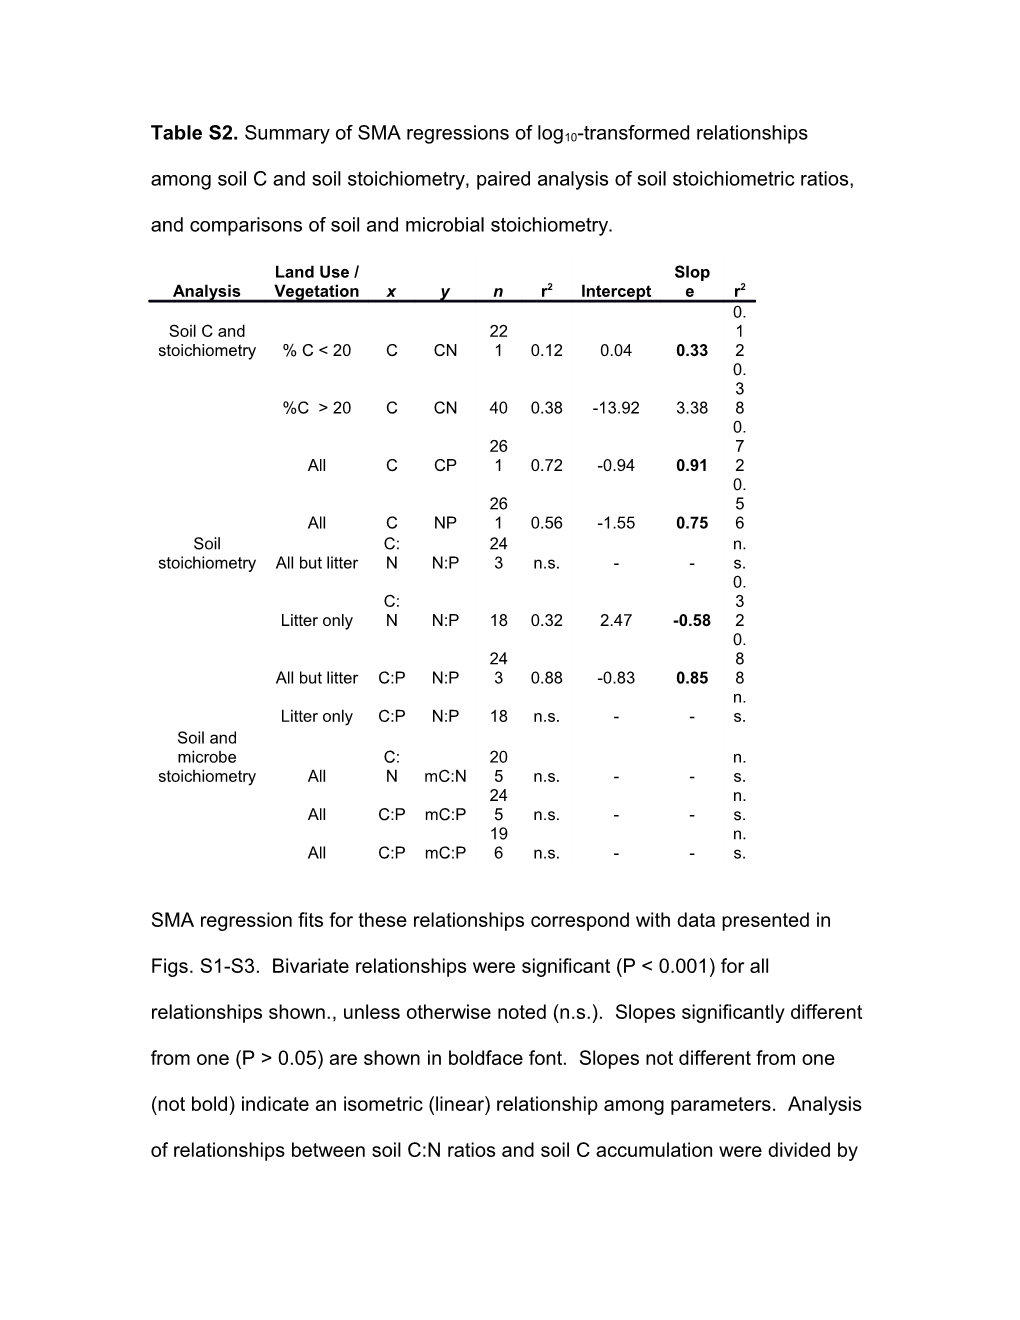 Table S2. Summary of SMA Regressions of Log10-Transformed Relationships Among Soil C And